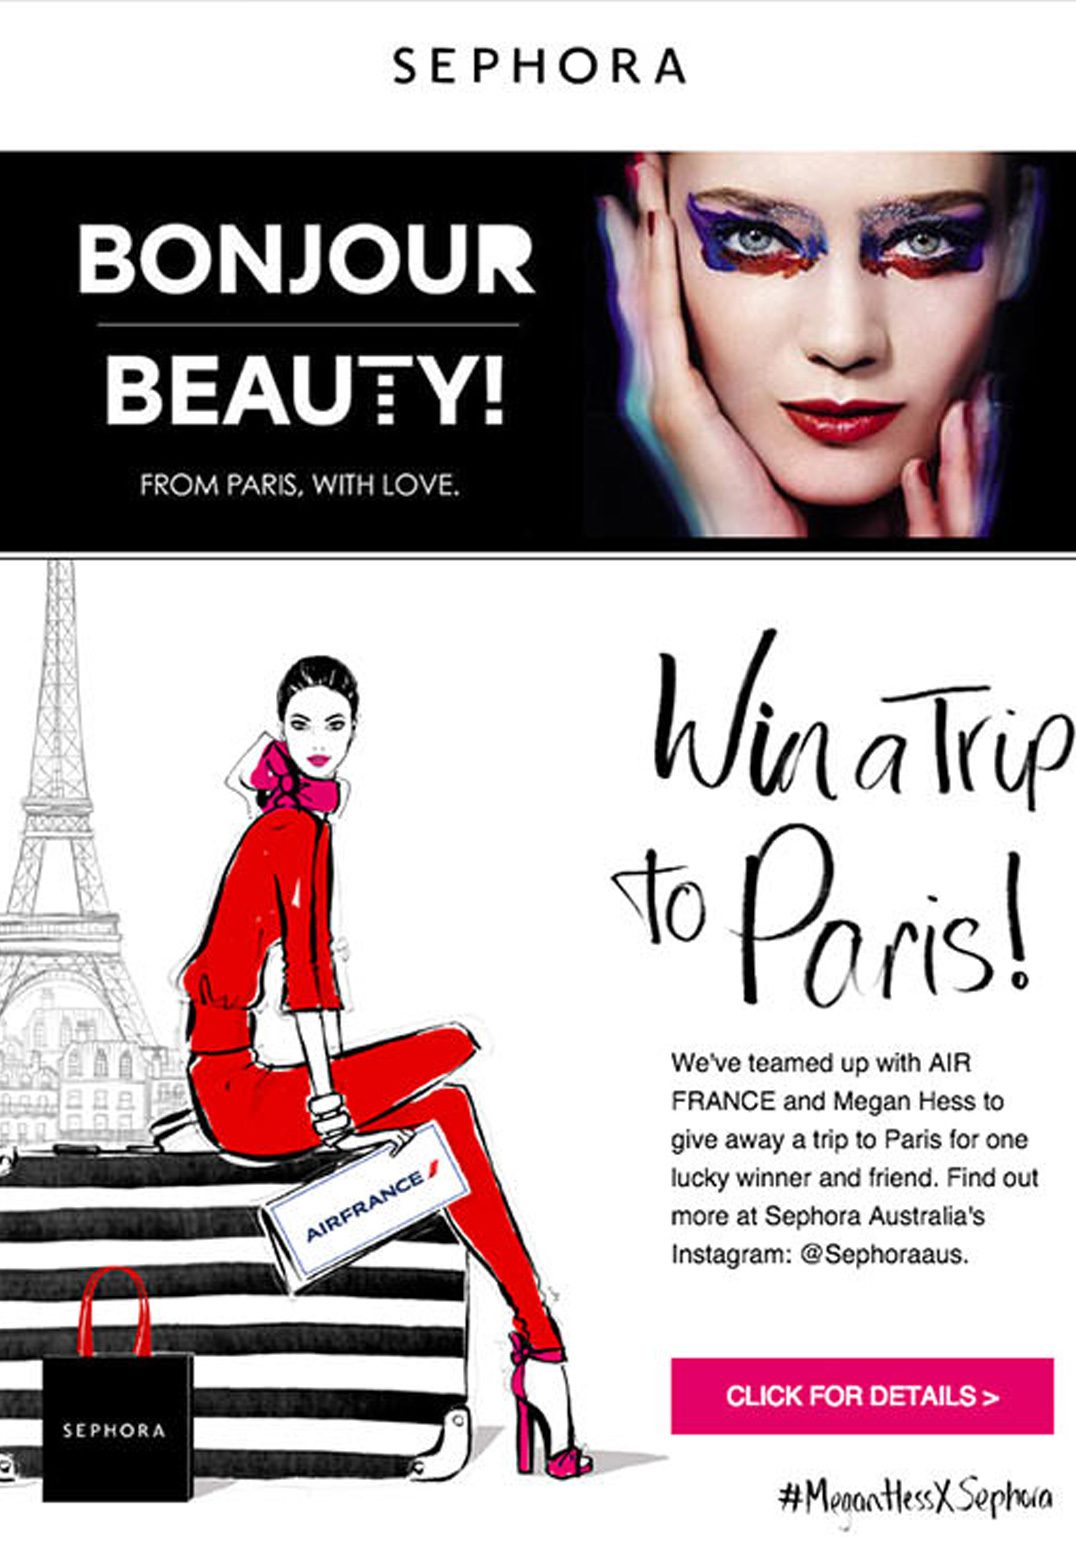 Check out how Sephora used an effective email to raise awareness of its Instagram contest: